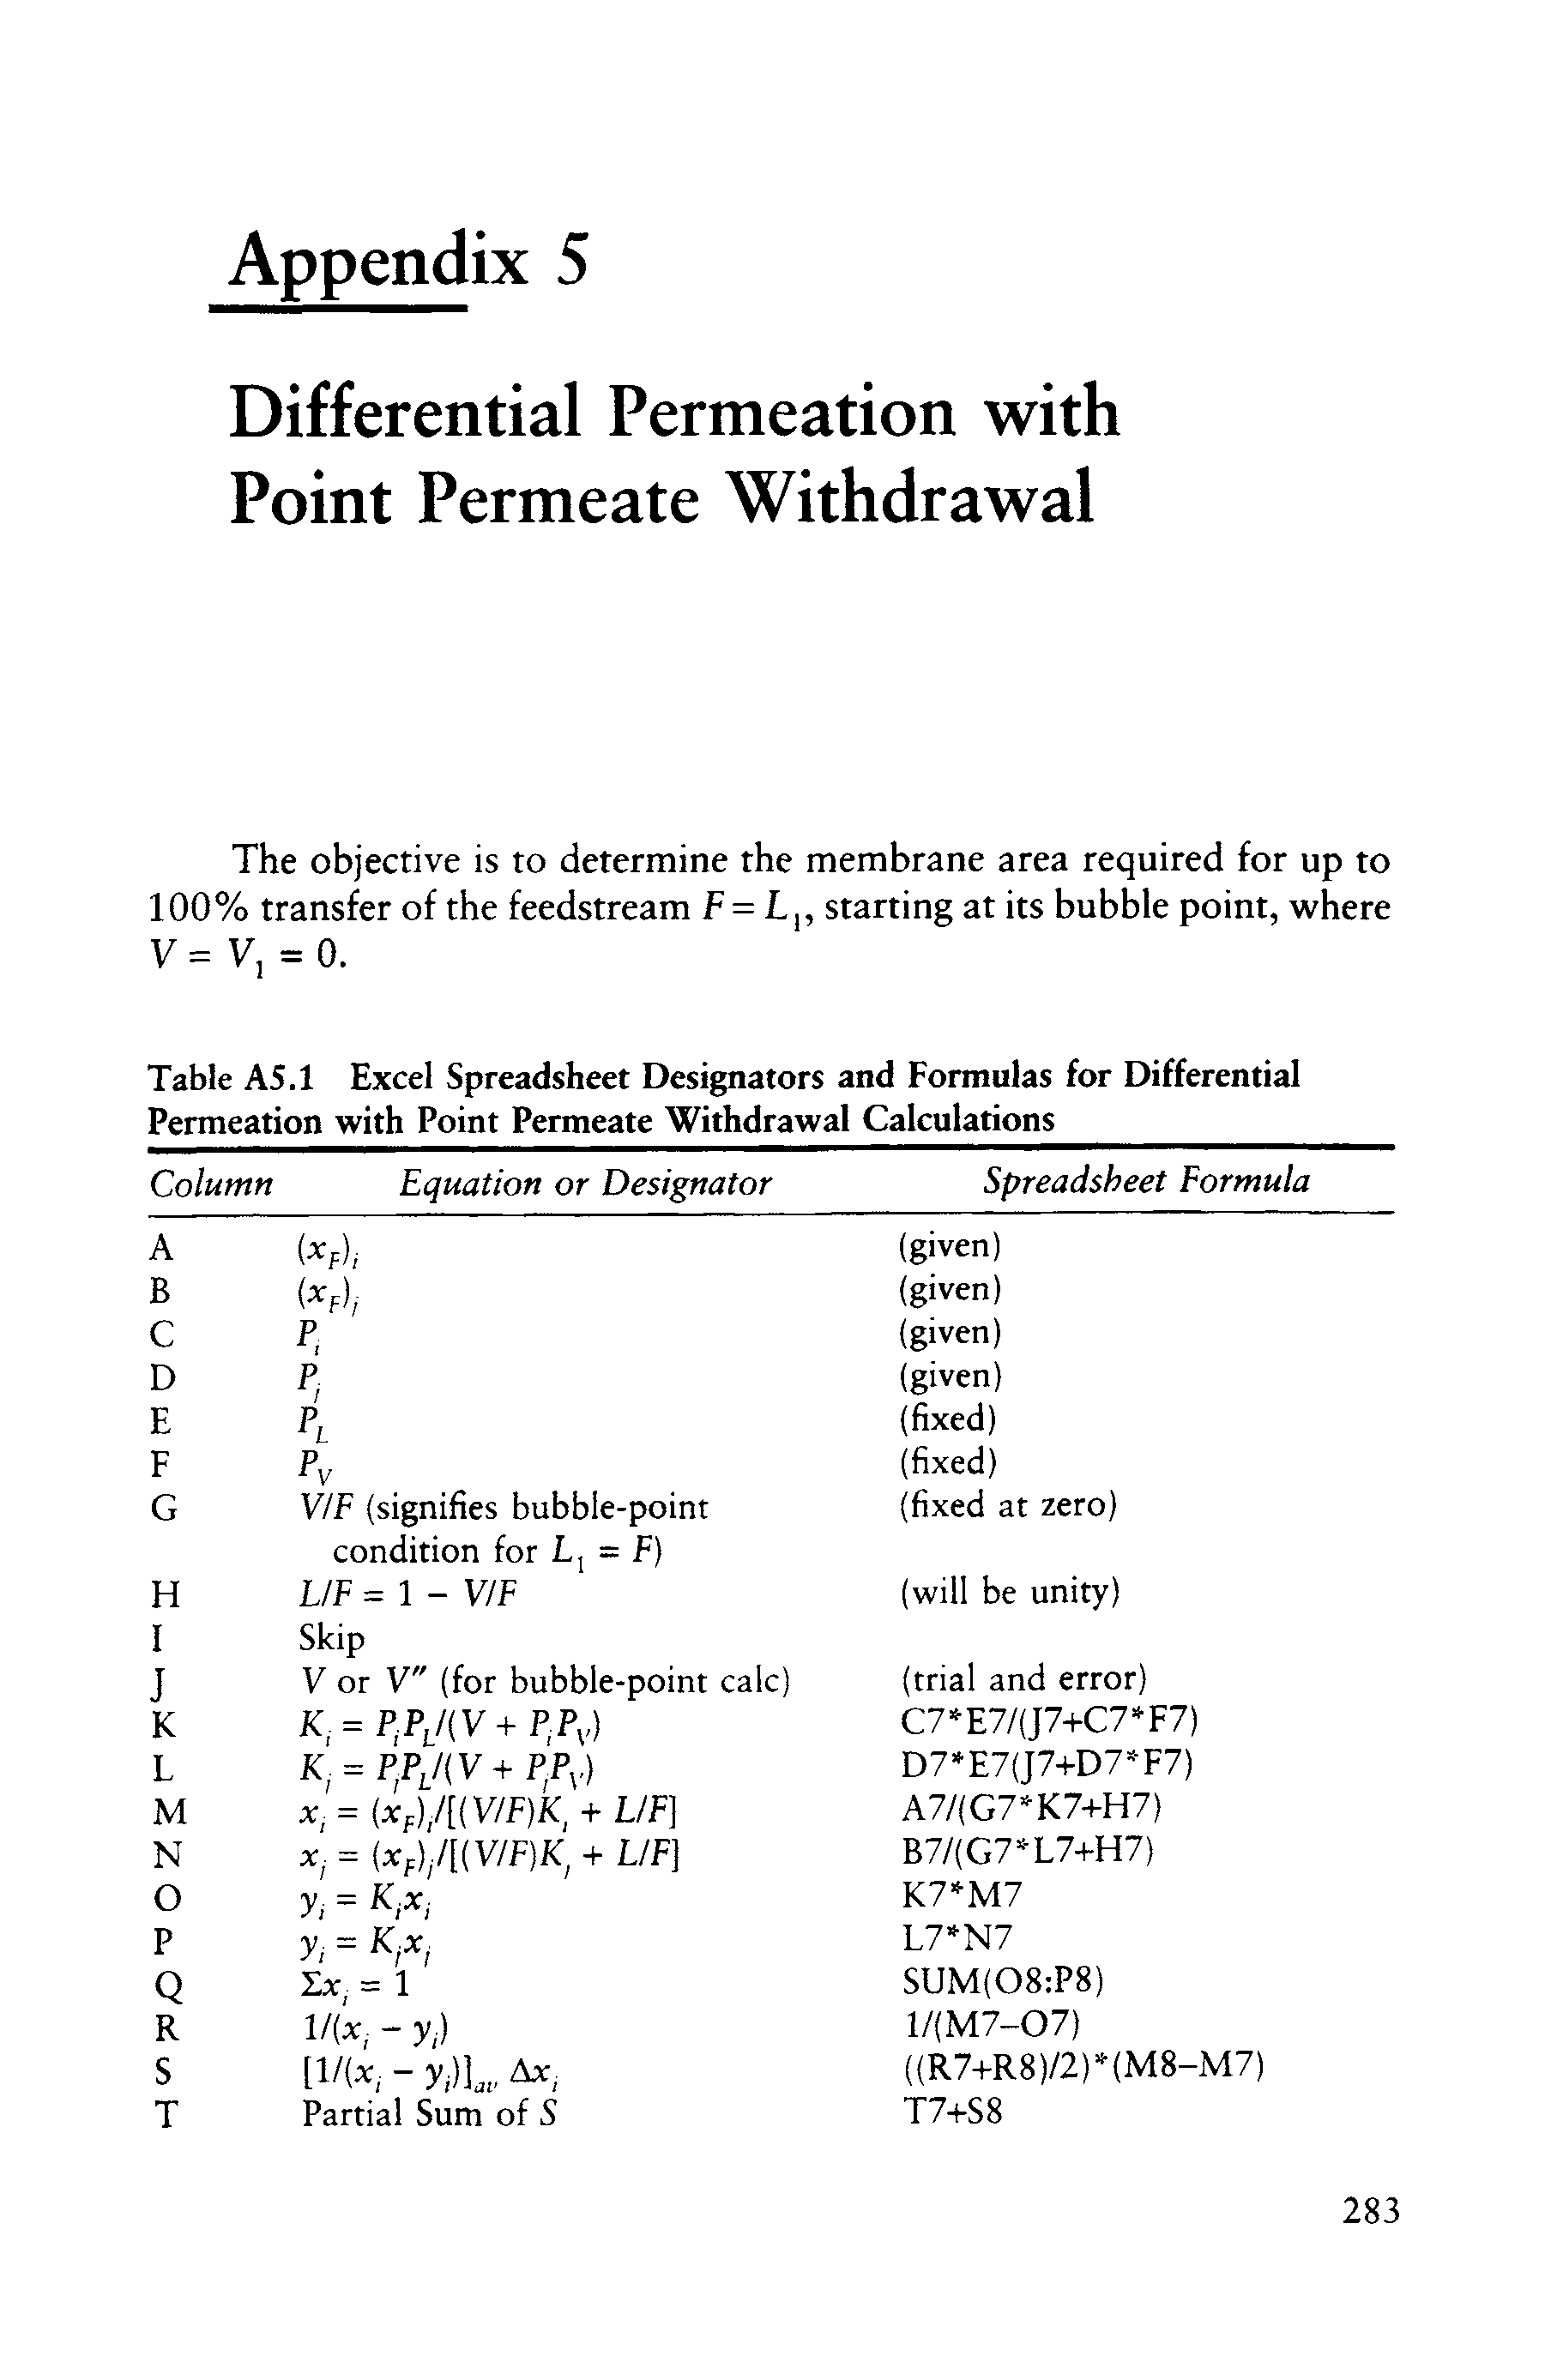 Table A5.1 Excel Spreadsheet Designators and Formulas for Differential Permeation with Point Permeate Withdrawal Calculations...